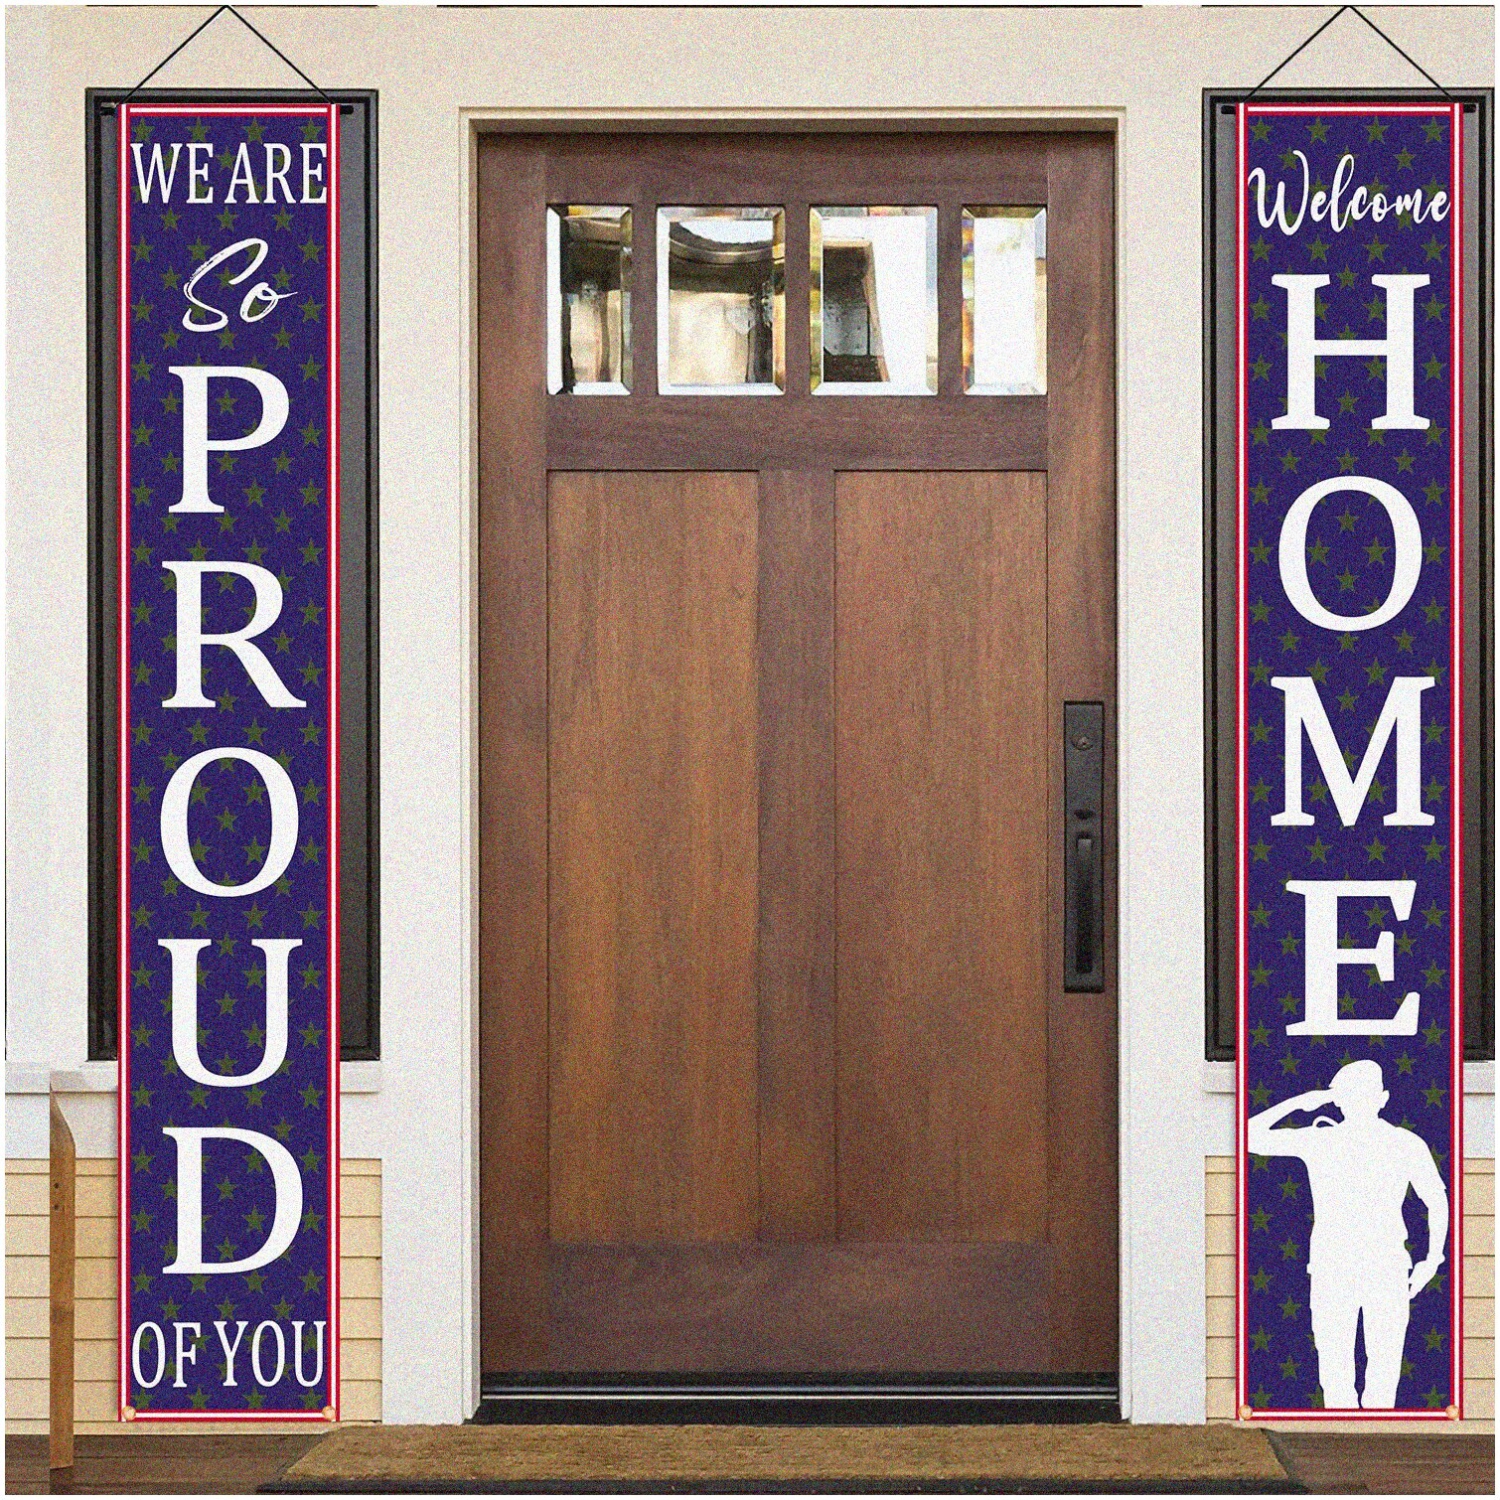 Hero's Homecoming: Patriotic Military Banner - Celebrate the Return of Our Brave Soldiers with Stunning Army Welcome Home Decorations & Party Supplies!